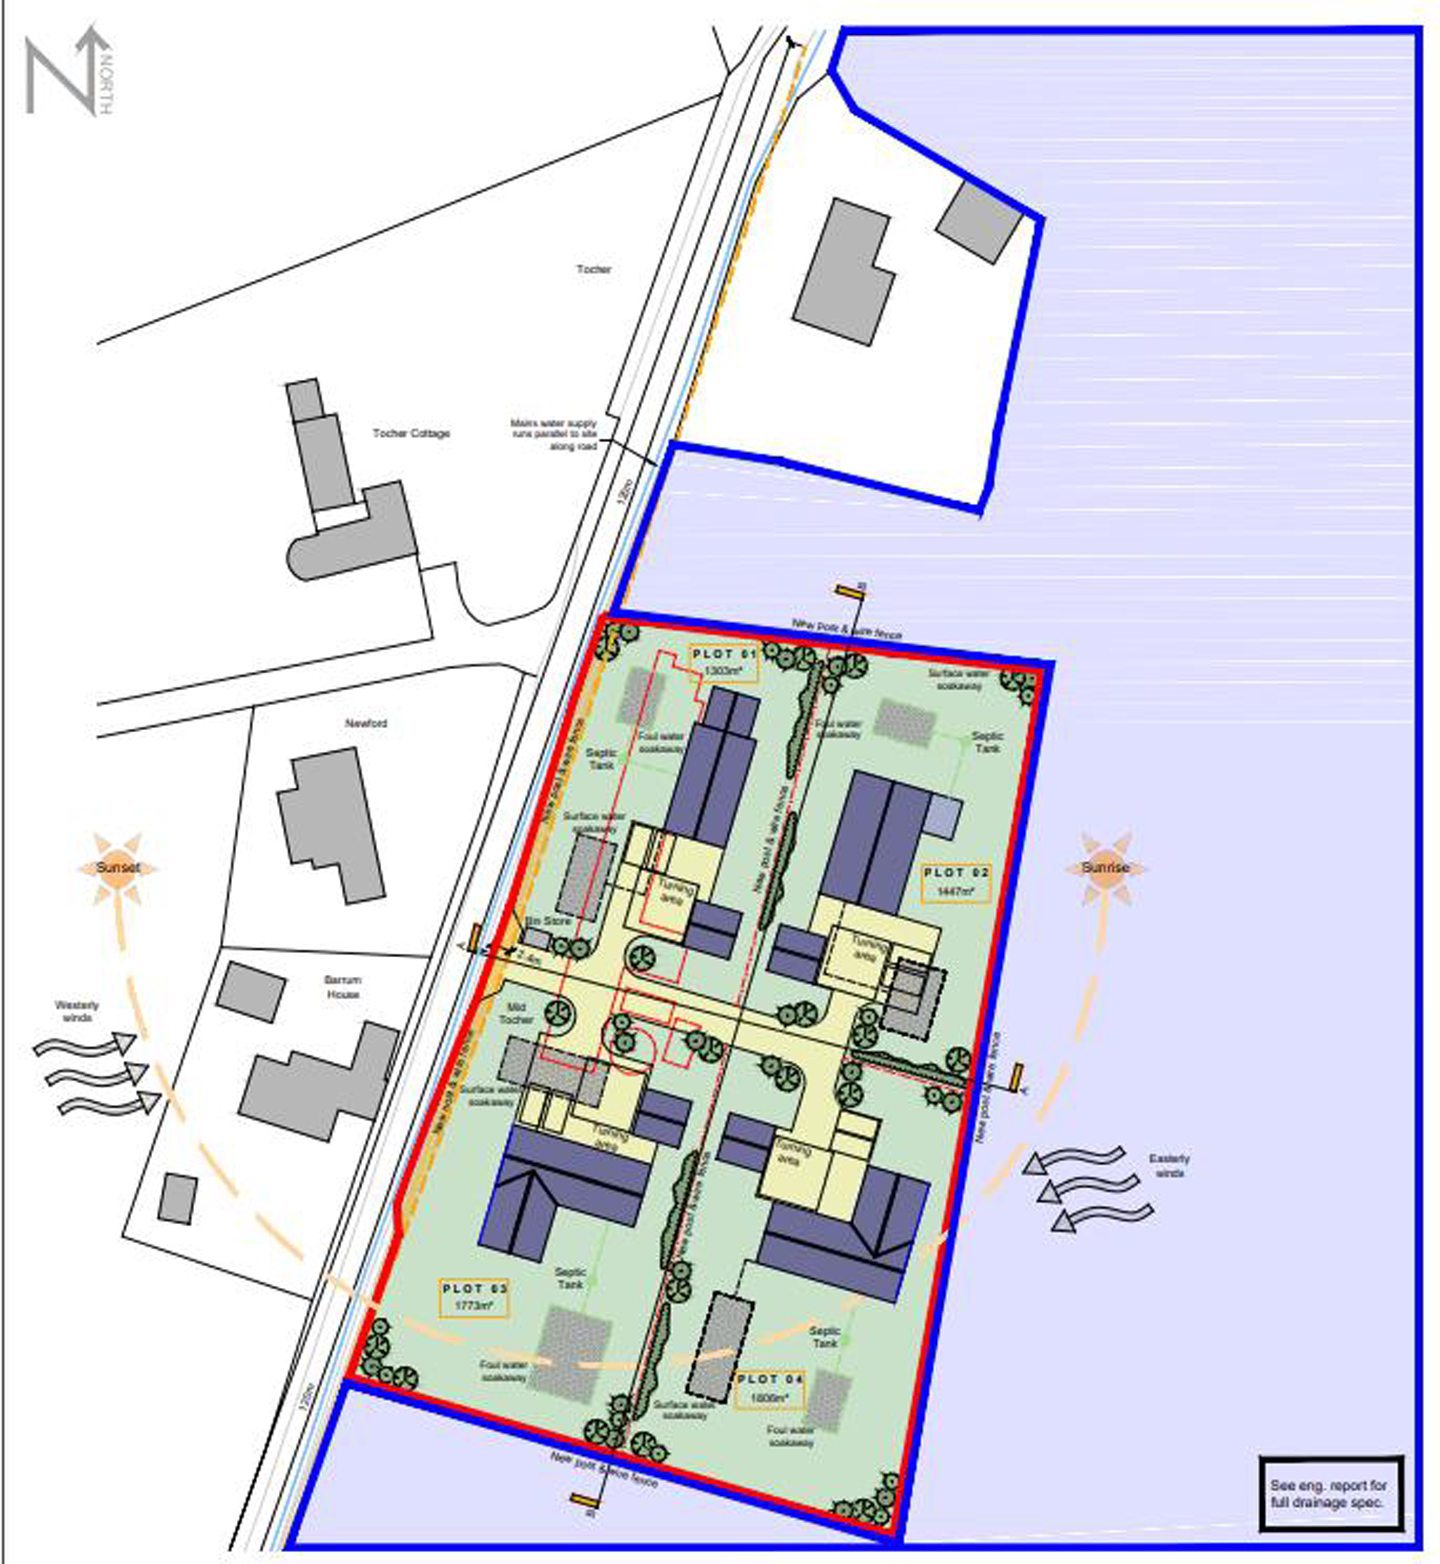 A map showing the plans for the home